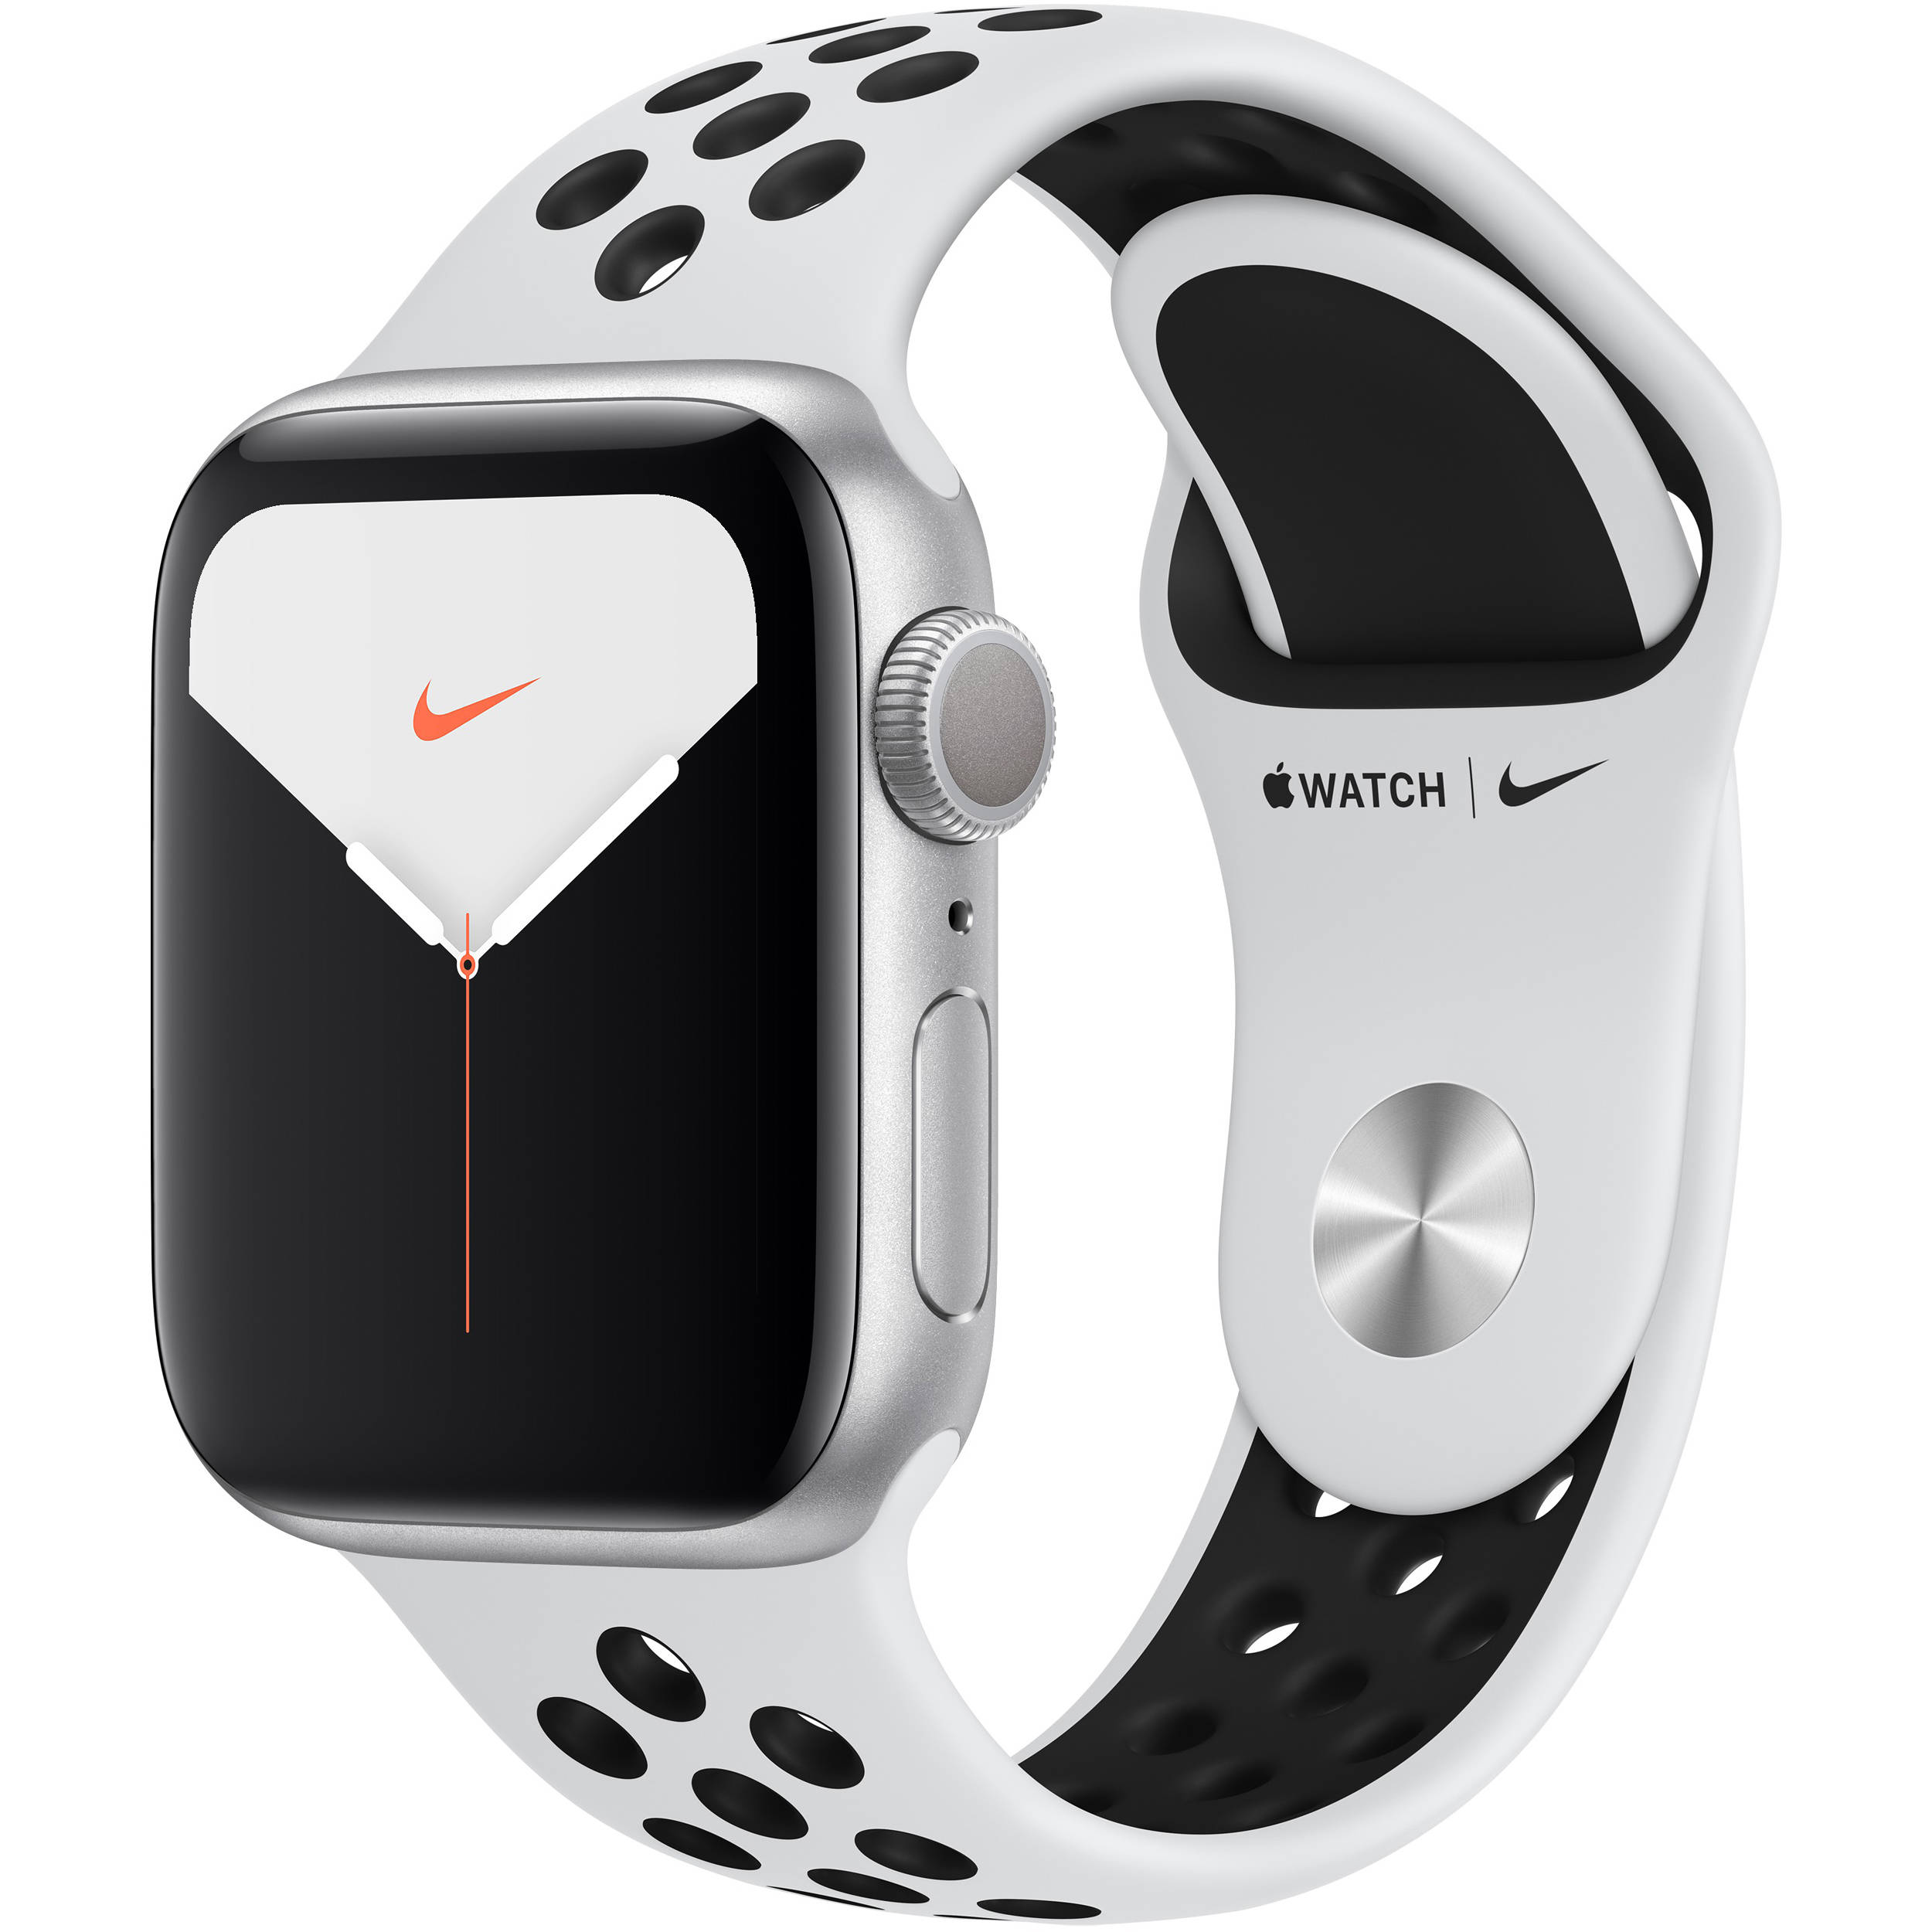 nike apple watch series 5 features